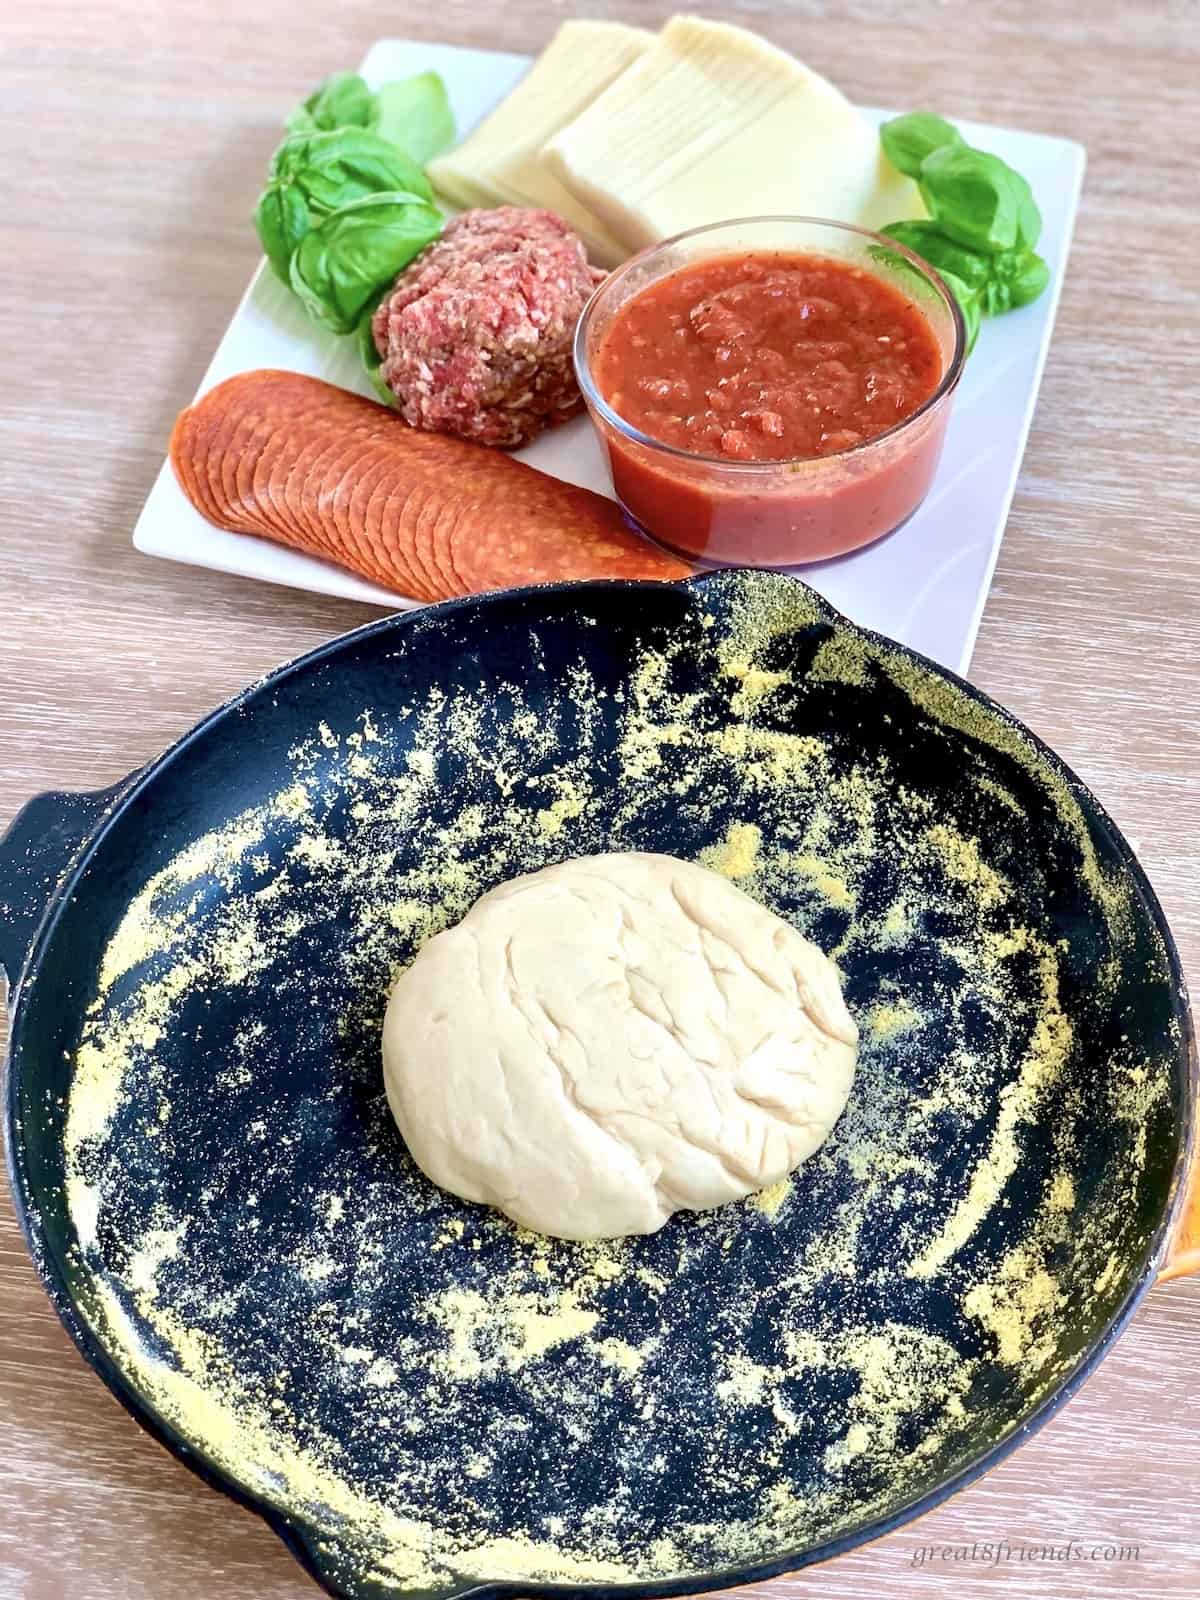 All ingredients for a Chicago pizza made in a cast iron skillet covered in corn meal. Ingredients on a white plate are sliced mozzarella, tomato sauce, sausage, pepperoni and basil leaves.